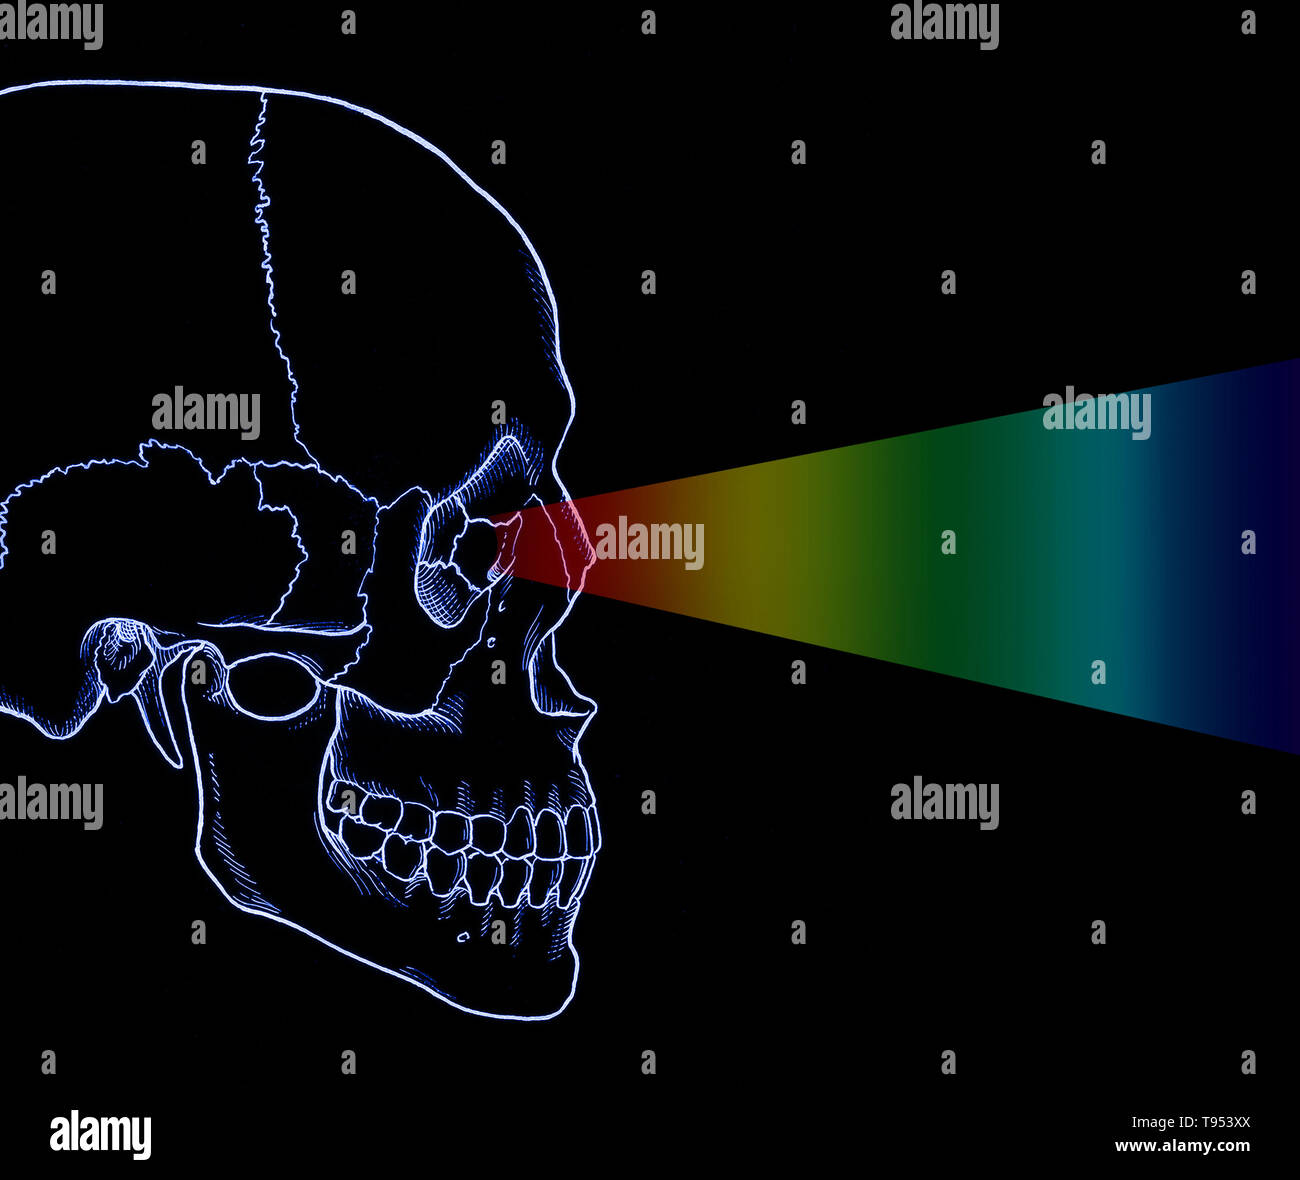 Illustration of the eye perceiving visible light. Stock Photo